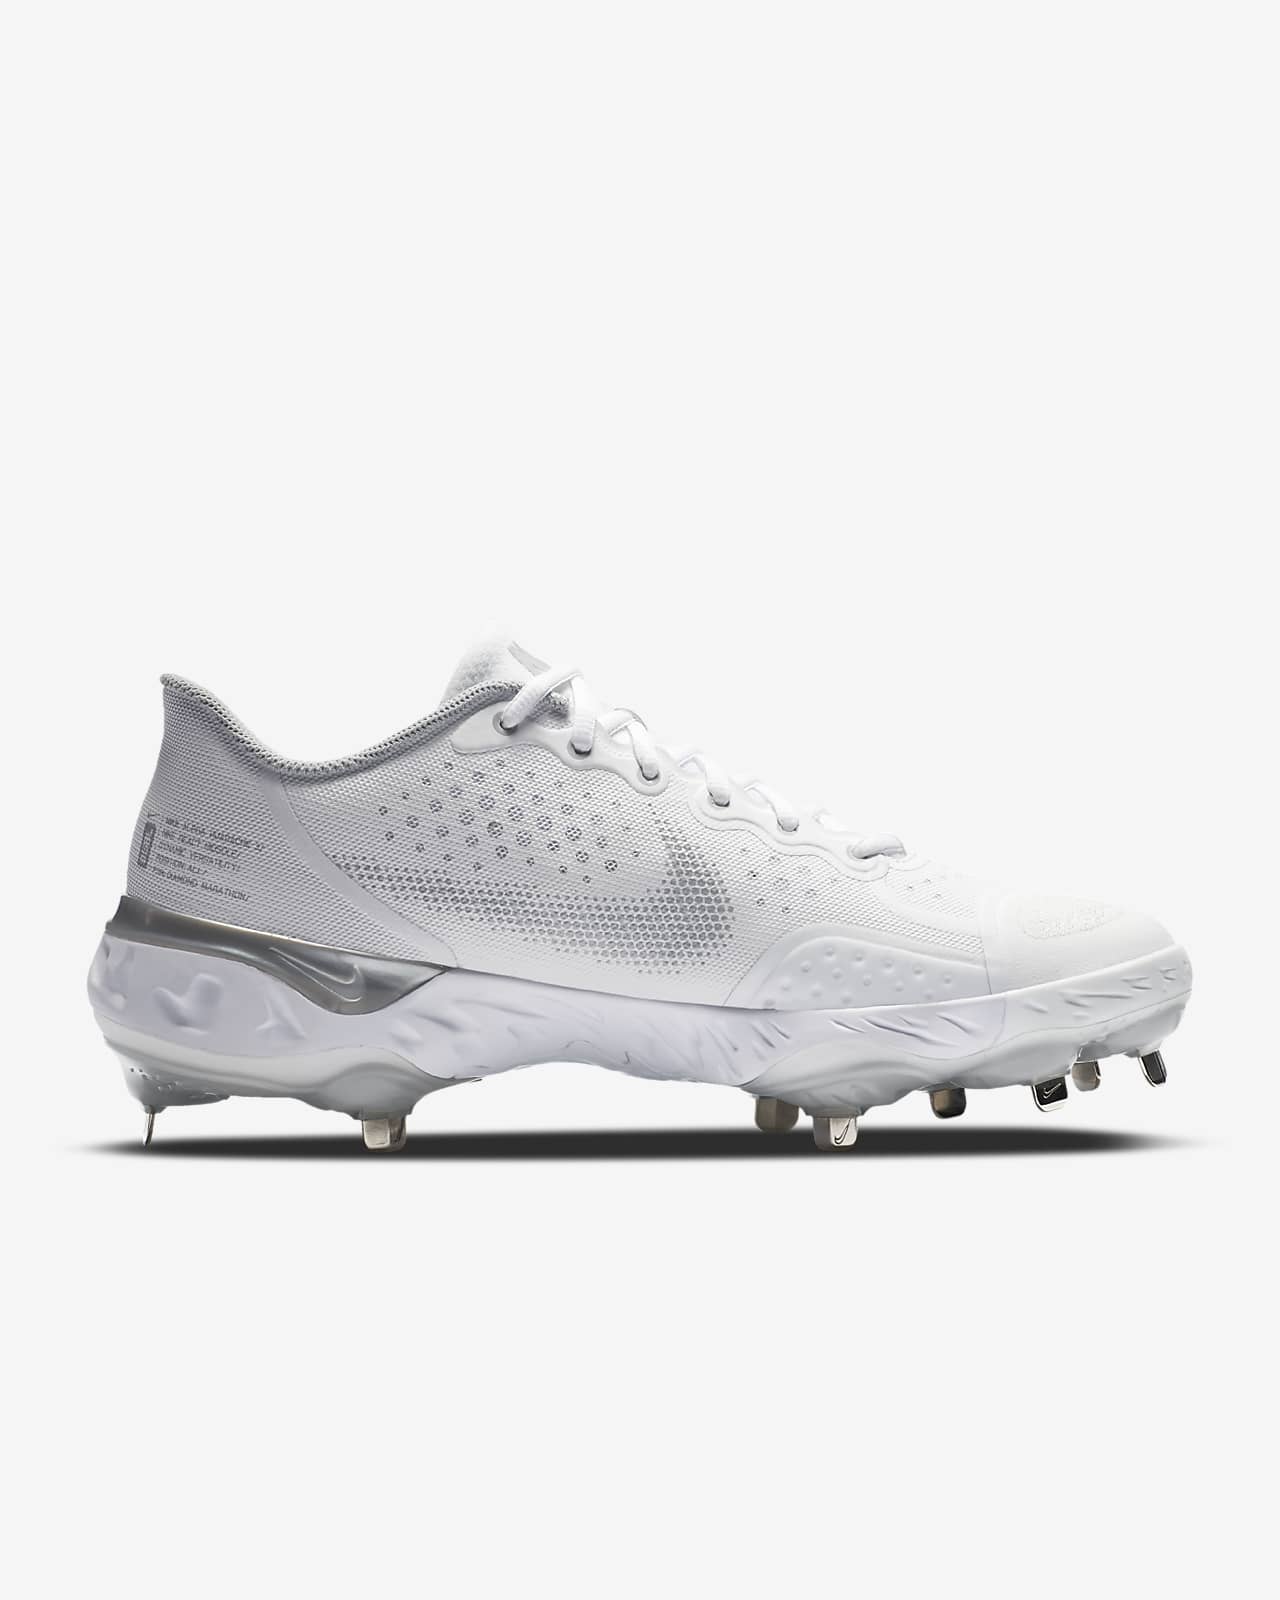 white and black nike cleats